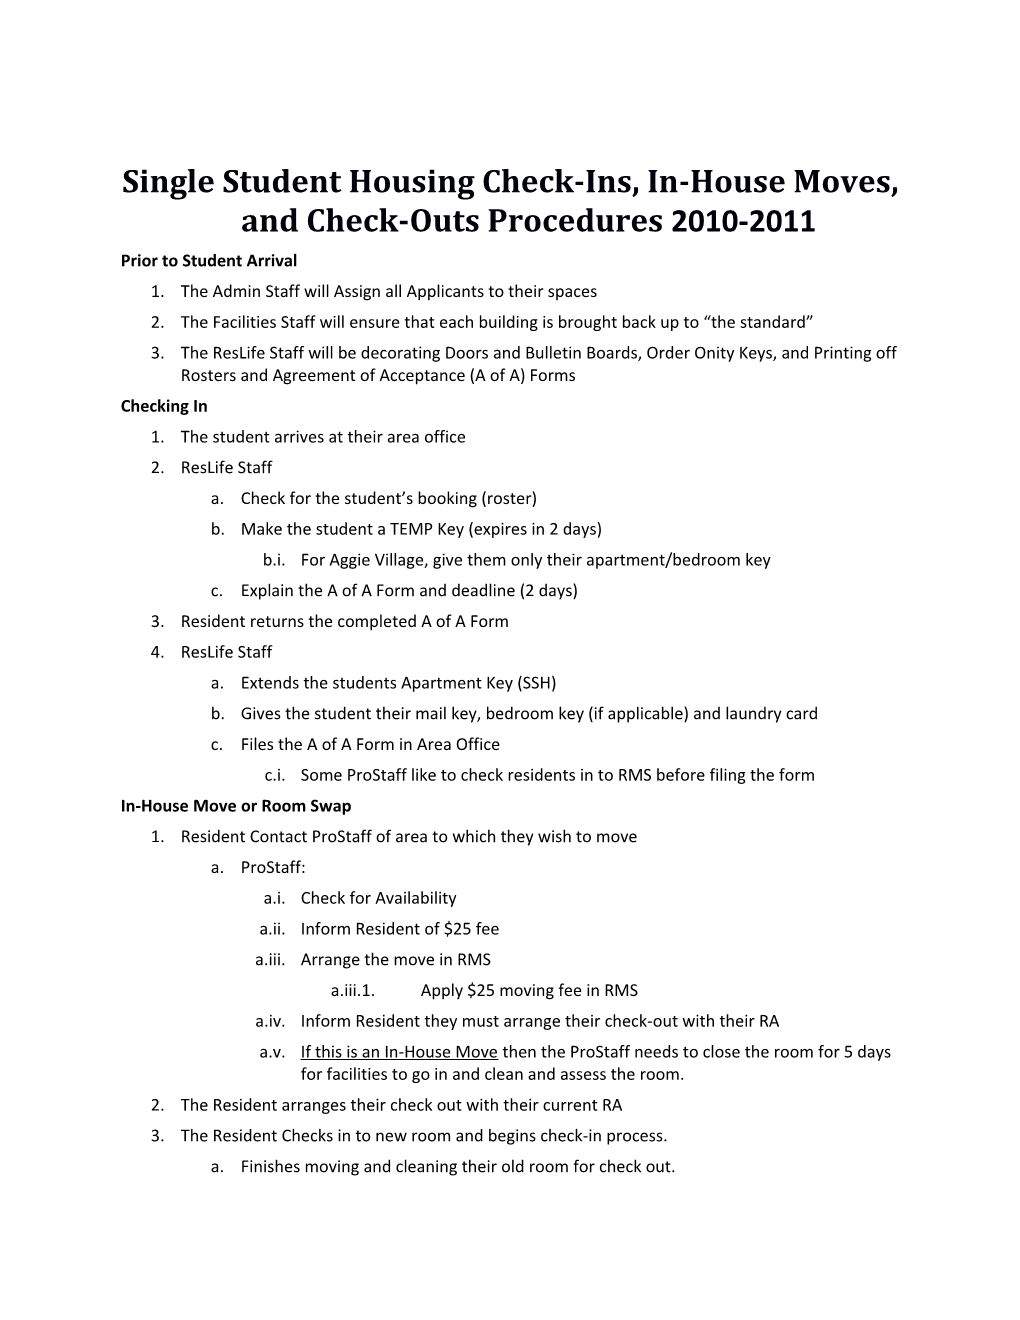 Single Student Housing Check-Ins, In-House Moves, and Check-Outs Procedures 2010-2011